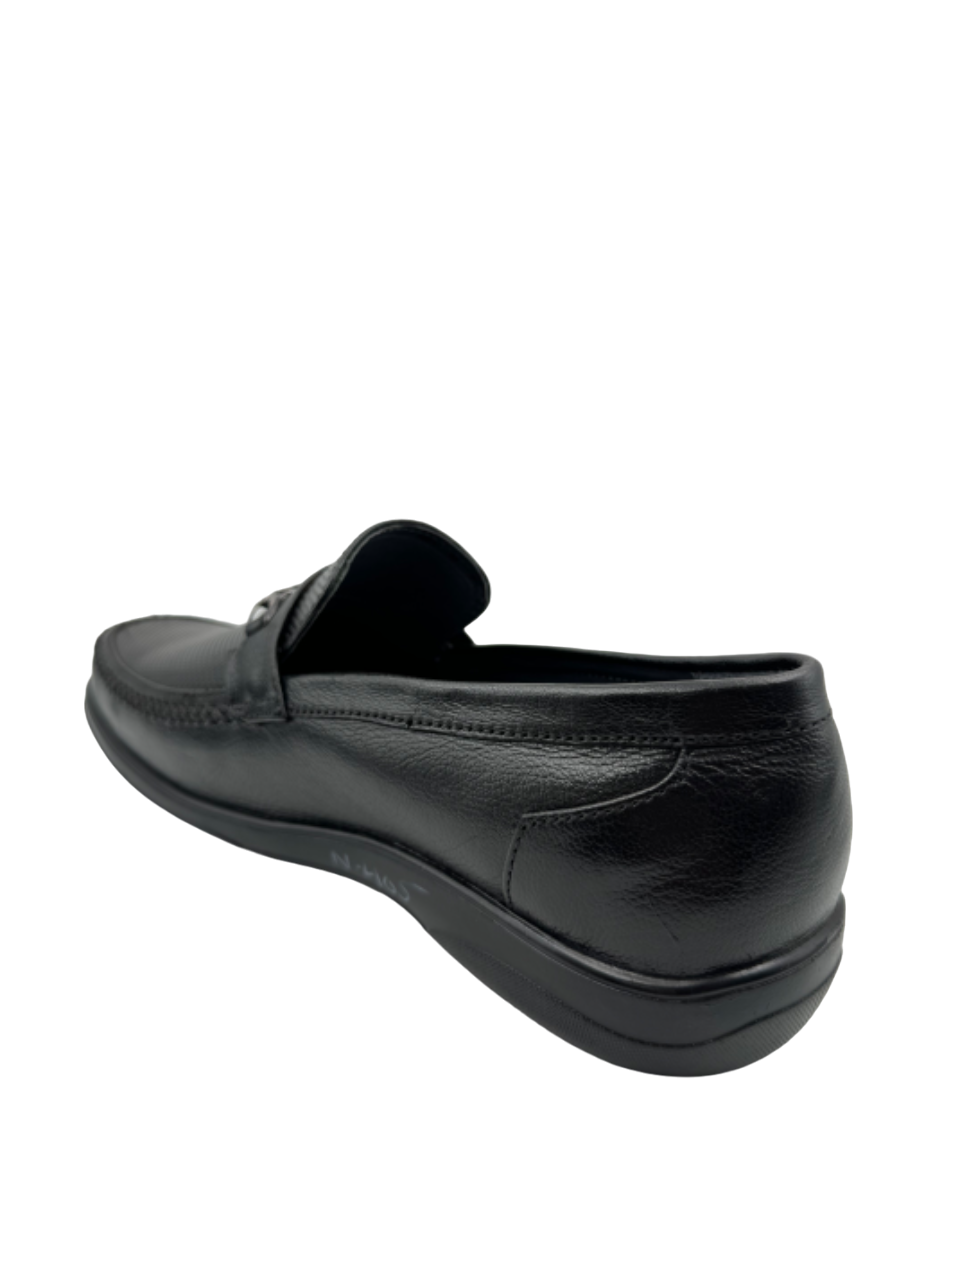 Ortho Soft Doctor Shoes GTSS 03